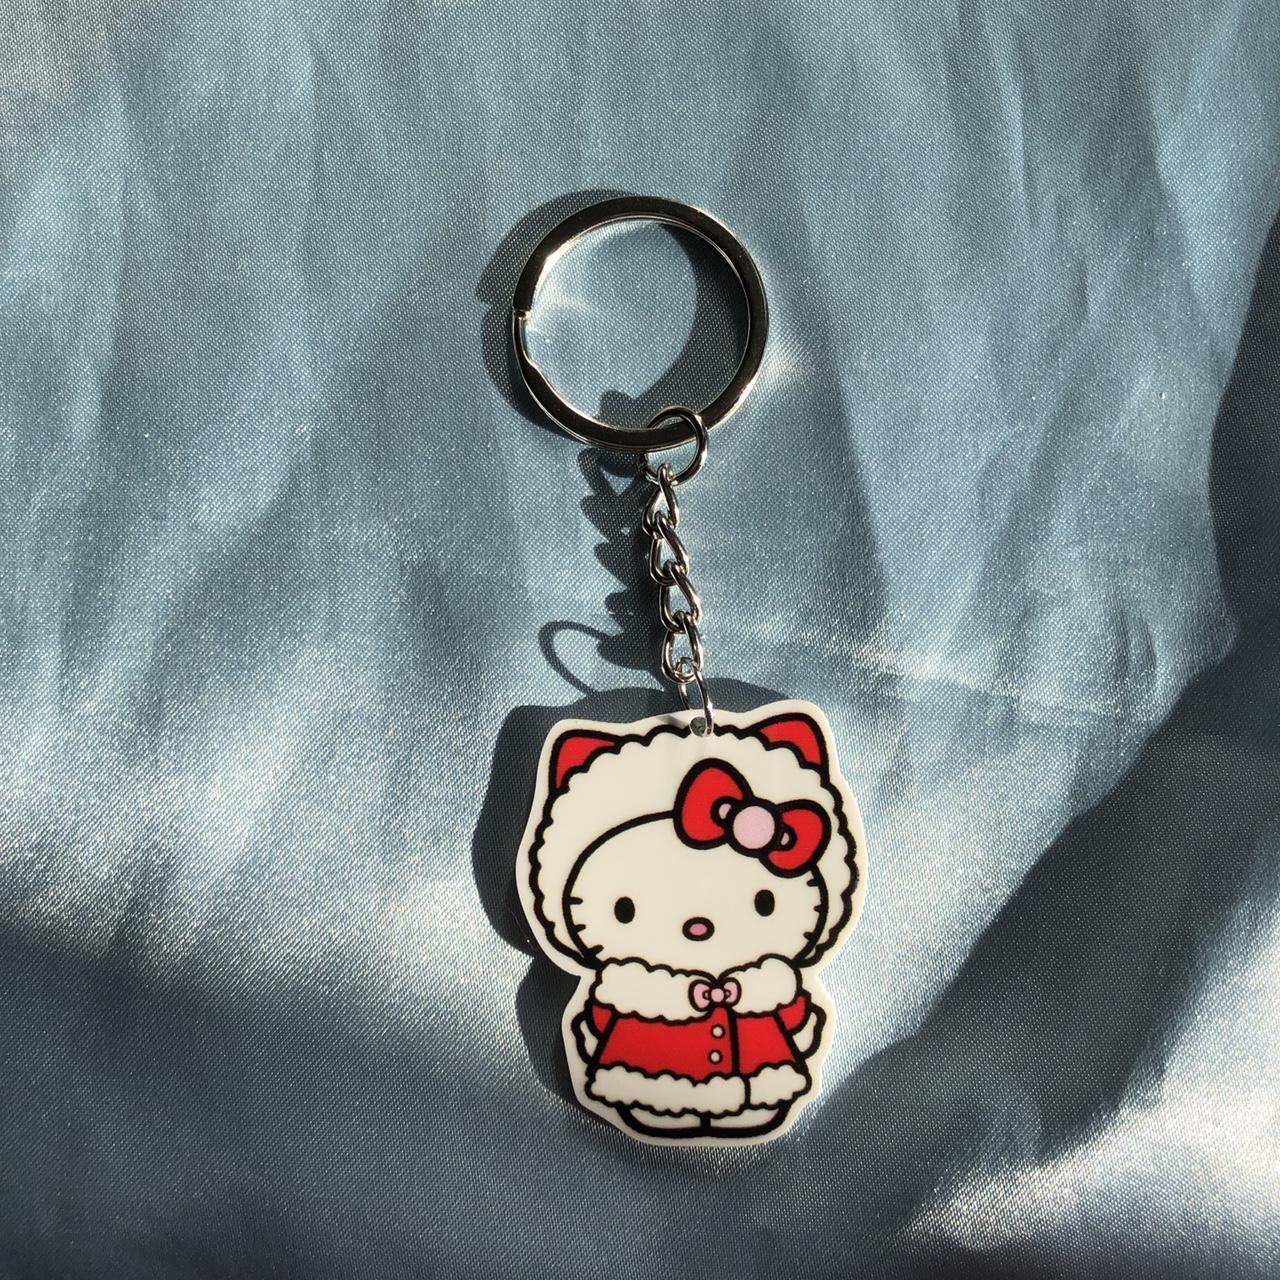 Product Image 1 - -Hello kitty keychain
-Shipping is $3.50
-All